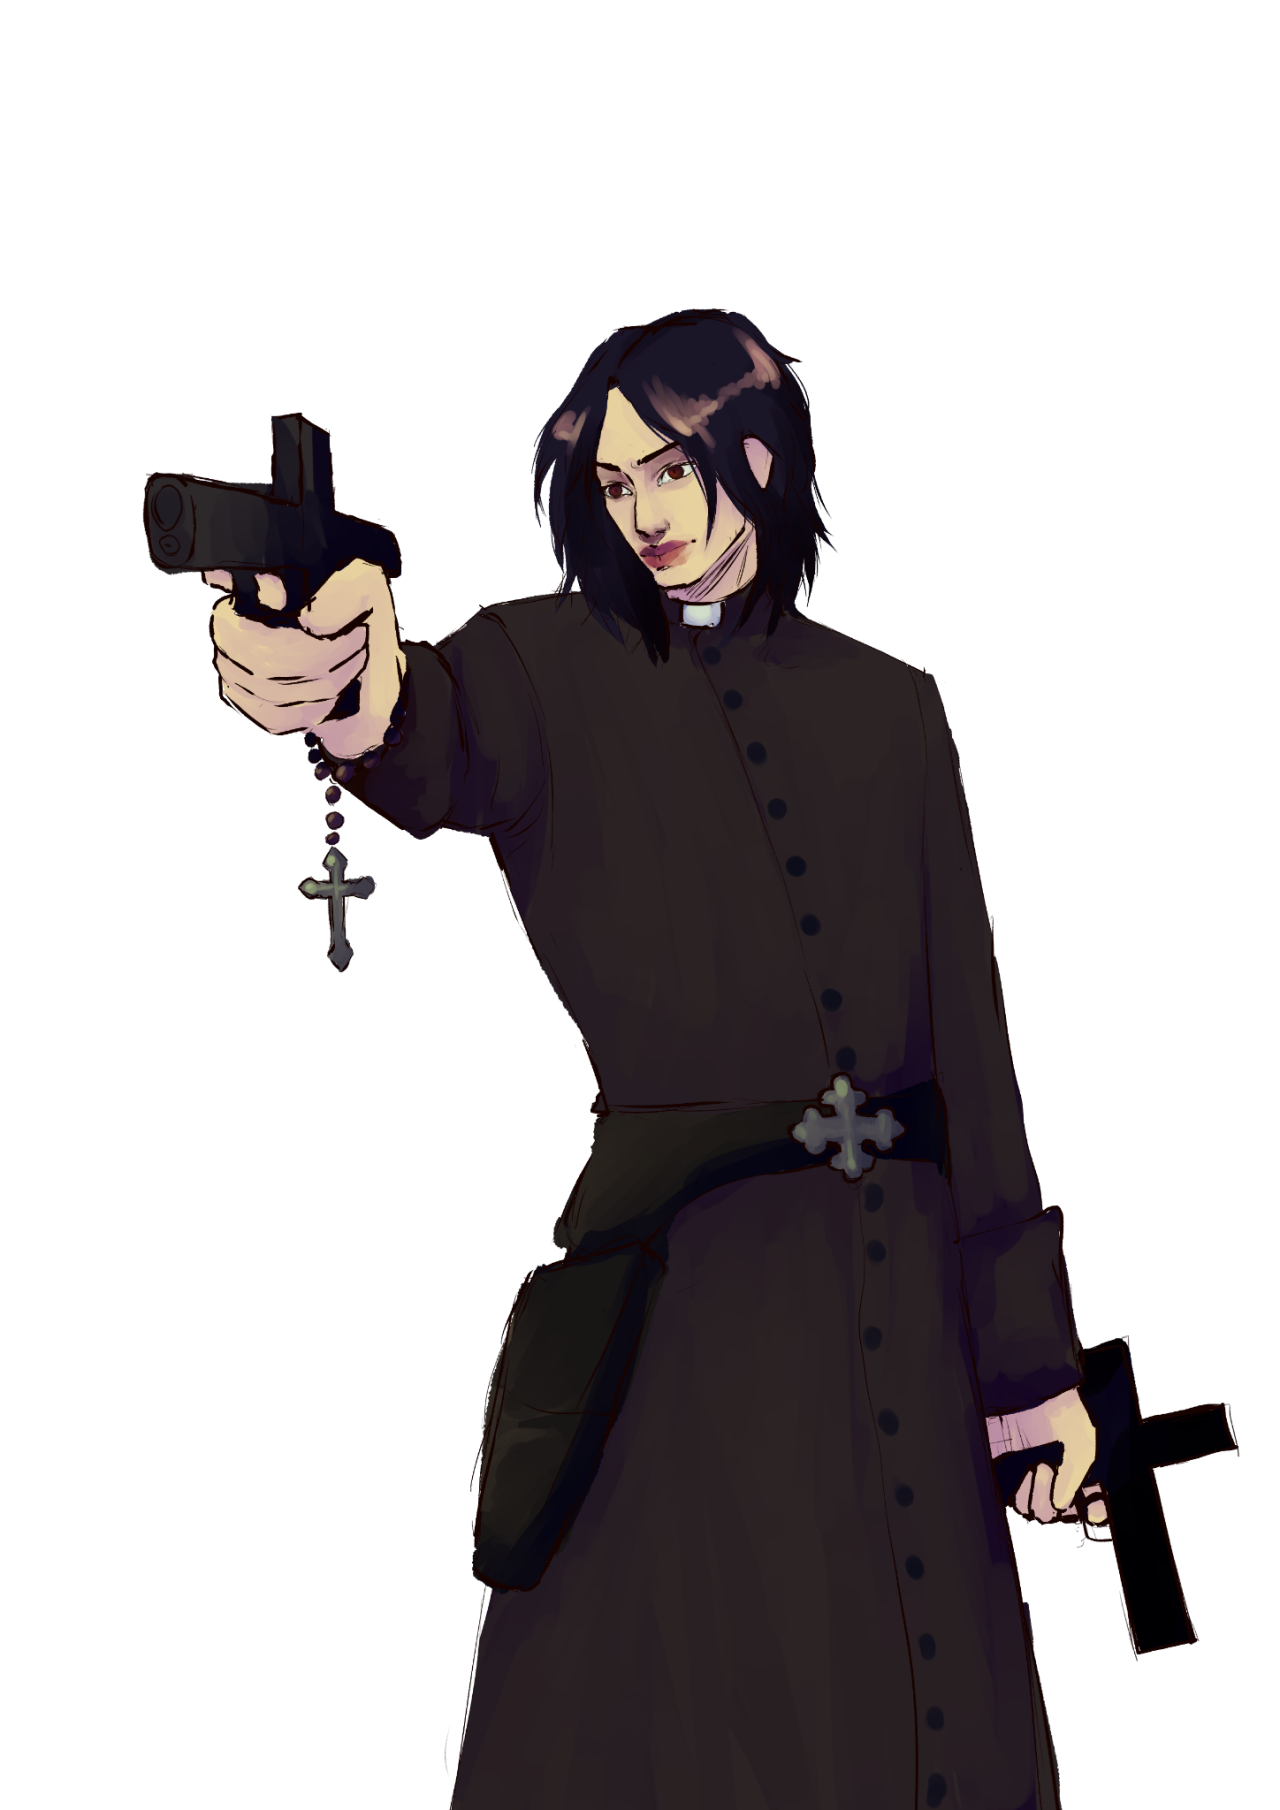 a digital illustration of a Vampire the Masquerade character, a priest holding crucifix shaped guns